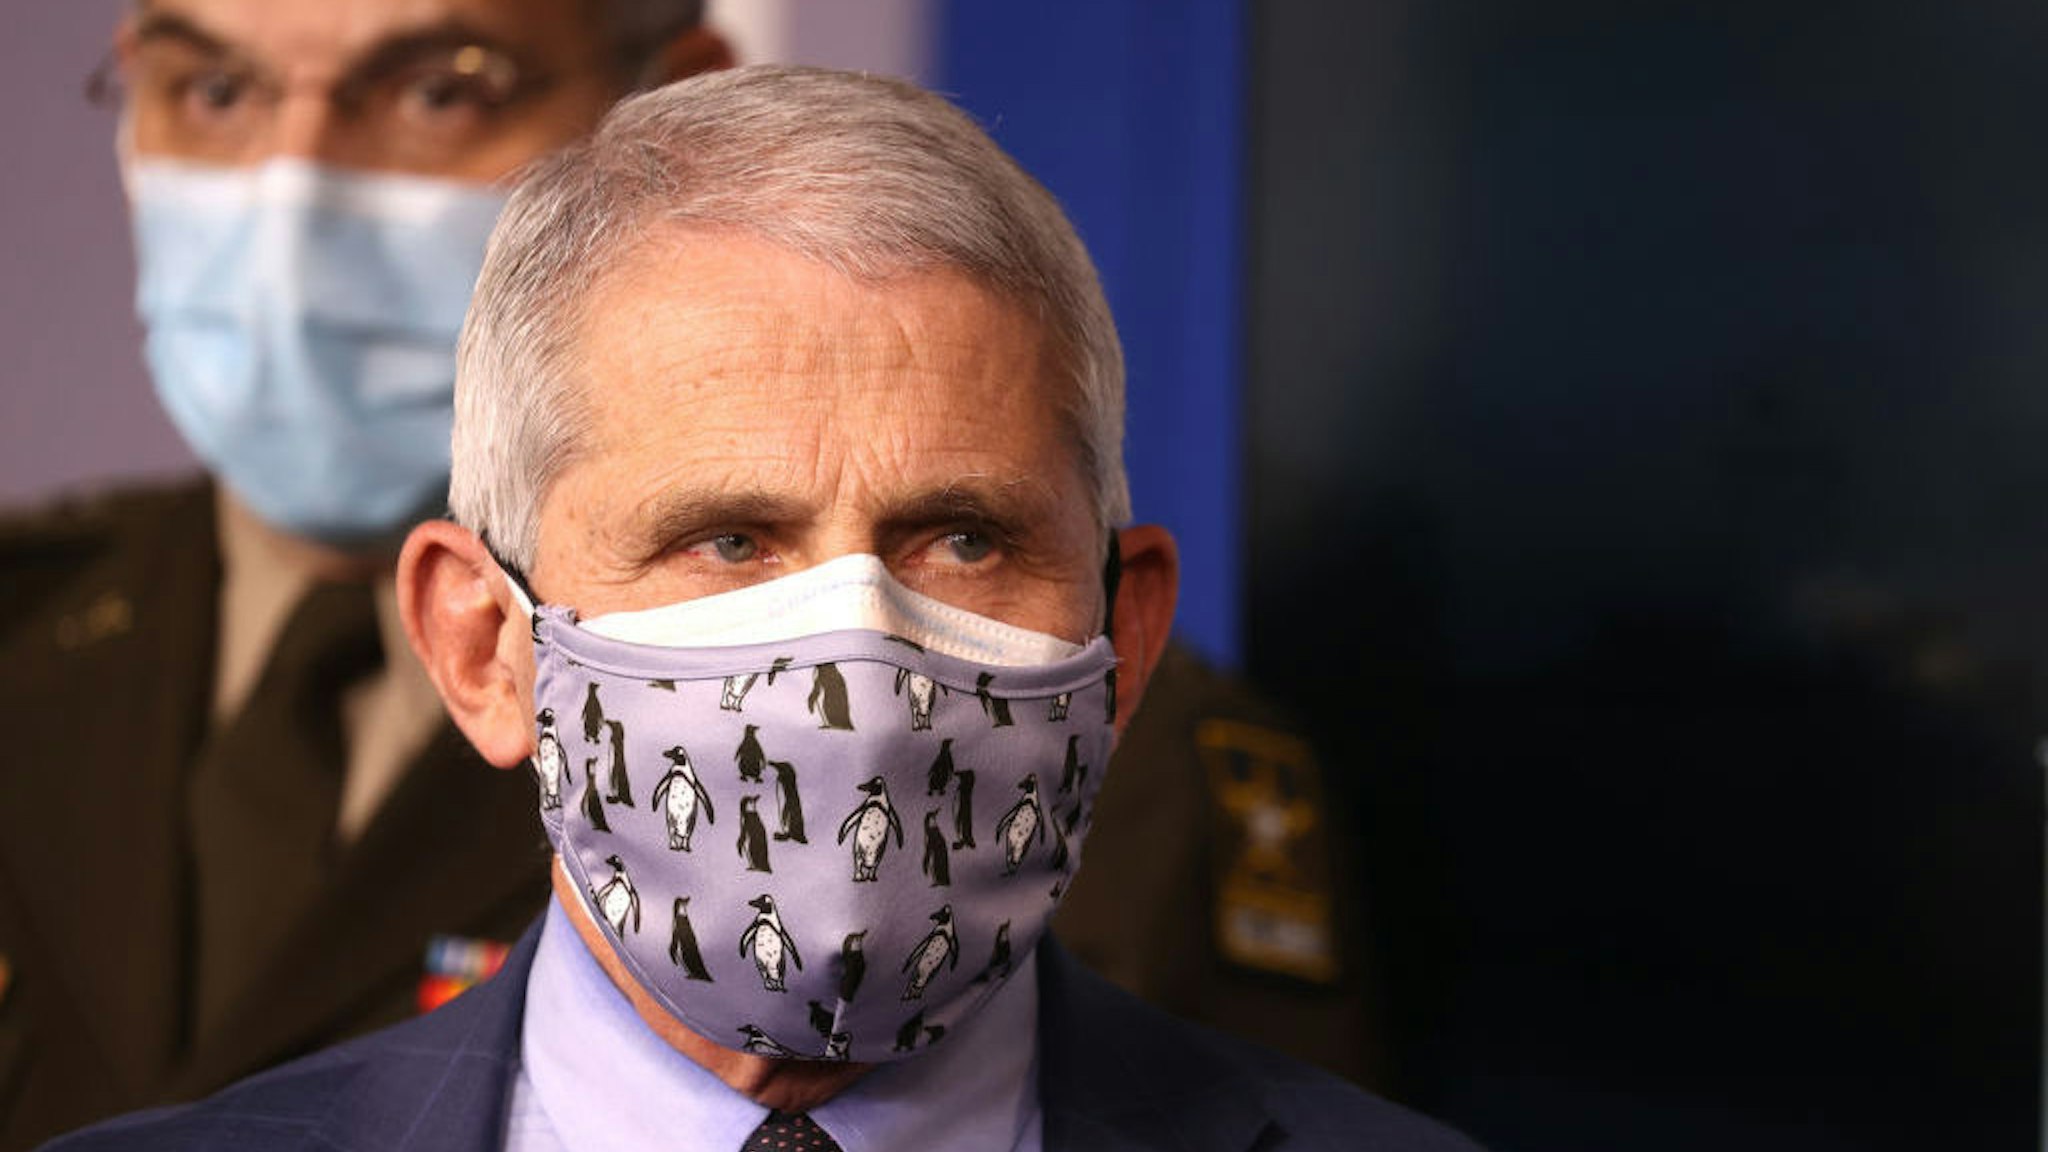 WASHINGTON, DC - NOVEMBER 19: Dr. Anthony Fauci, director of the National Institute of Allergy and Infectious Diseases, wears a protective mask during a White House Coronavirus Task Force press briefing in the James Brady Press Briefing Room at the White House on November 19, 2020 in Washington, DC. The White House held its first Coronavirus Task Force briefing in months as cases of COVID-19 are surging across the country ahead of the Thanksgiving holiday. (Photo by Tasos Katopodis/Getty Images)